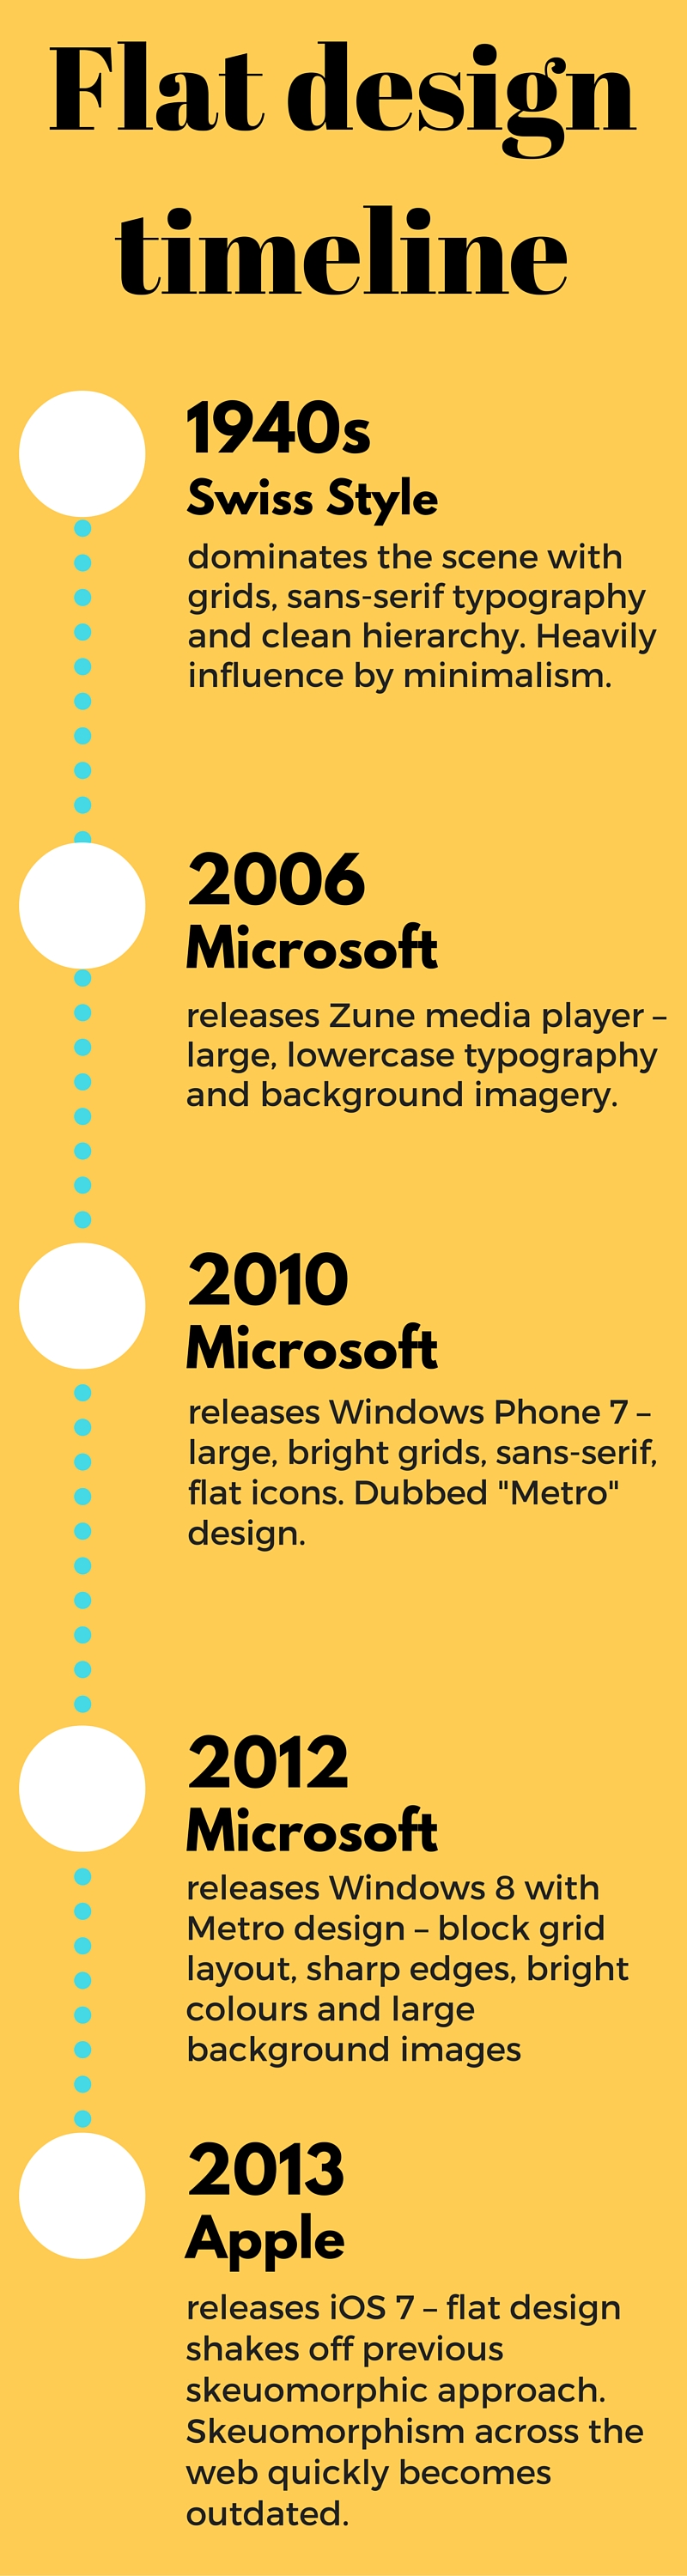 Timeline of flat design: 1940s Swiss Style; 2006 Microsoft releases Zune; 2010 Microsoft releases Windows Phone 7; 2012 Microsoft releases Windows 8; 2013 Apple releases iOS 7